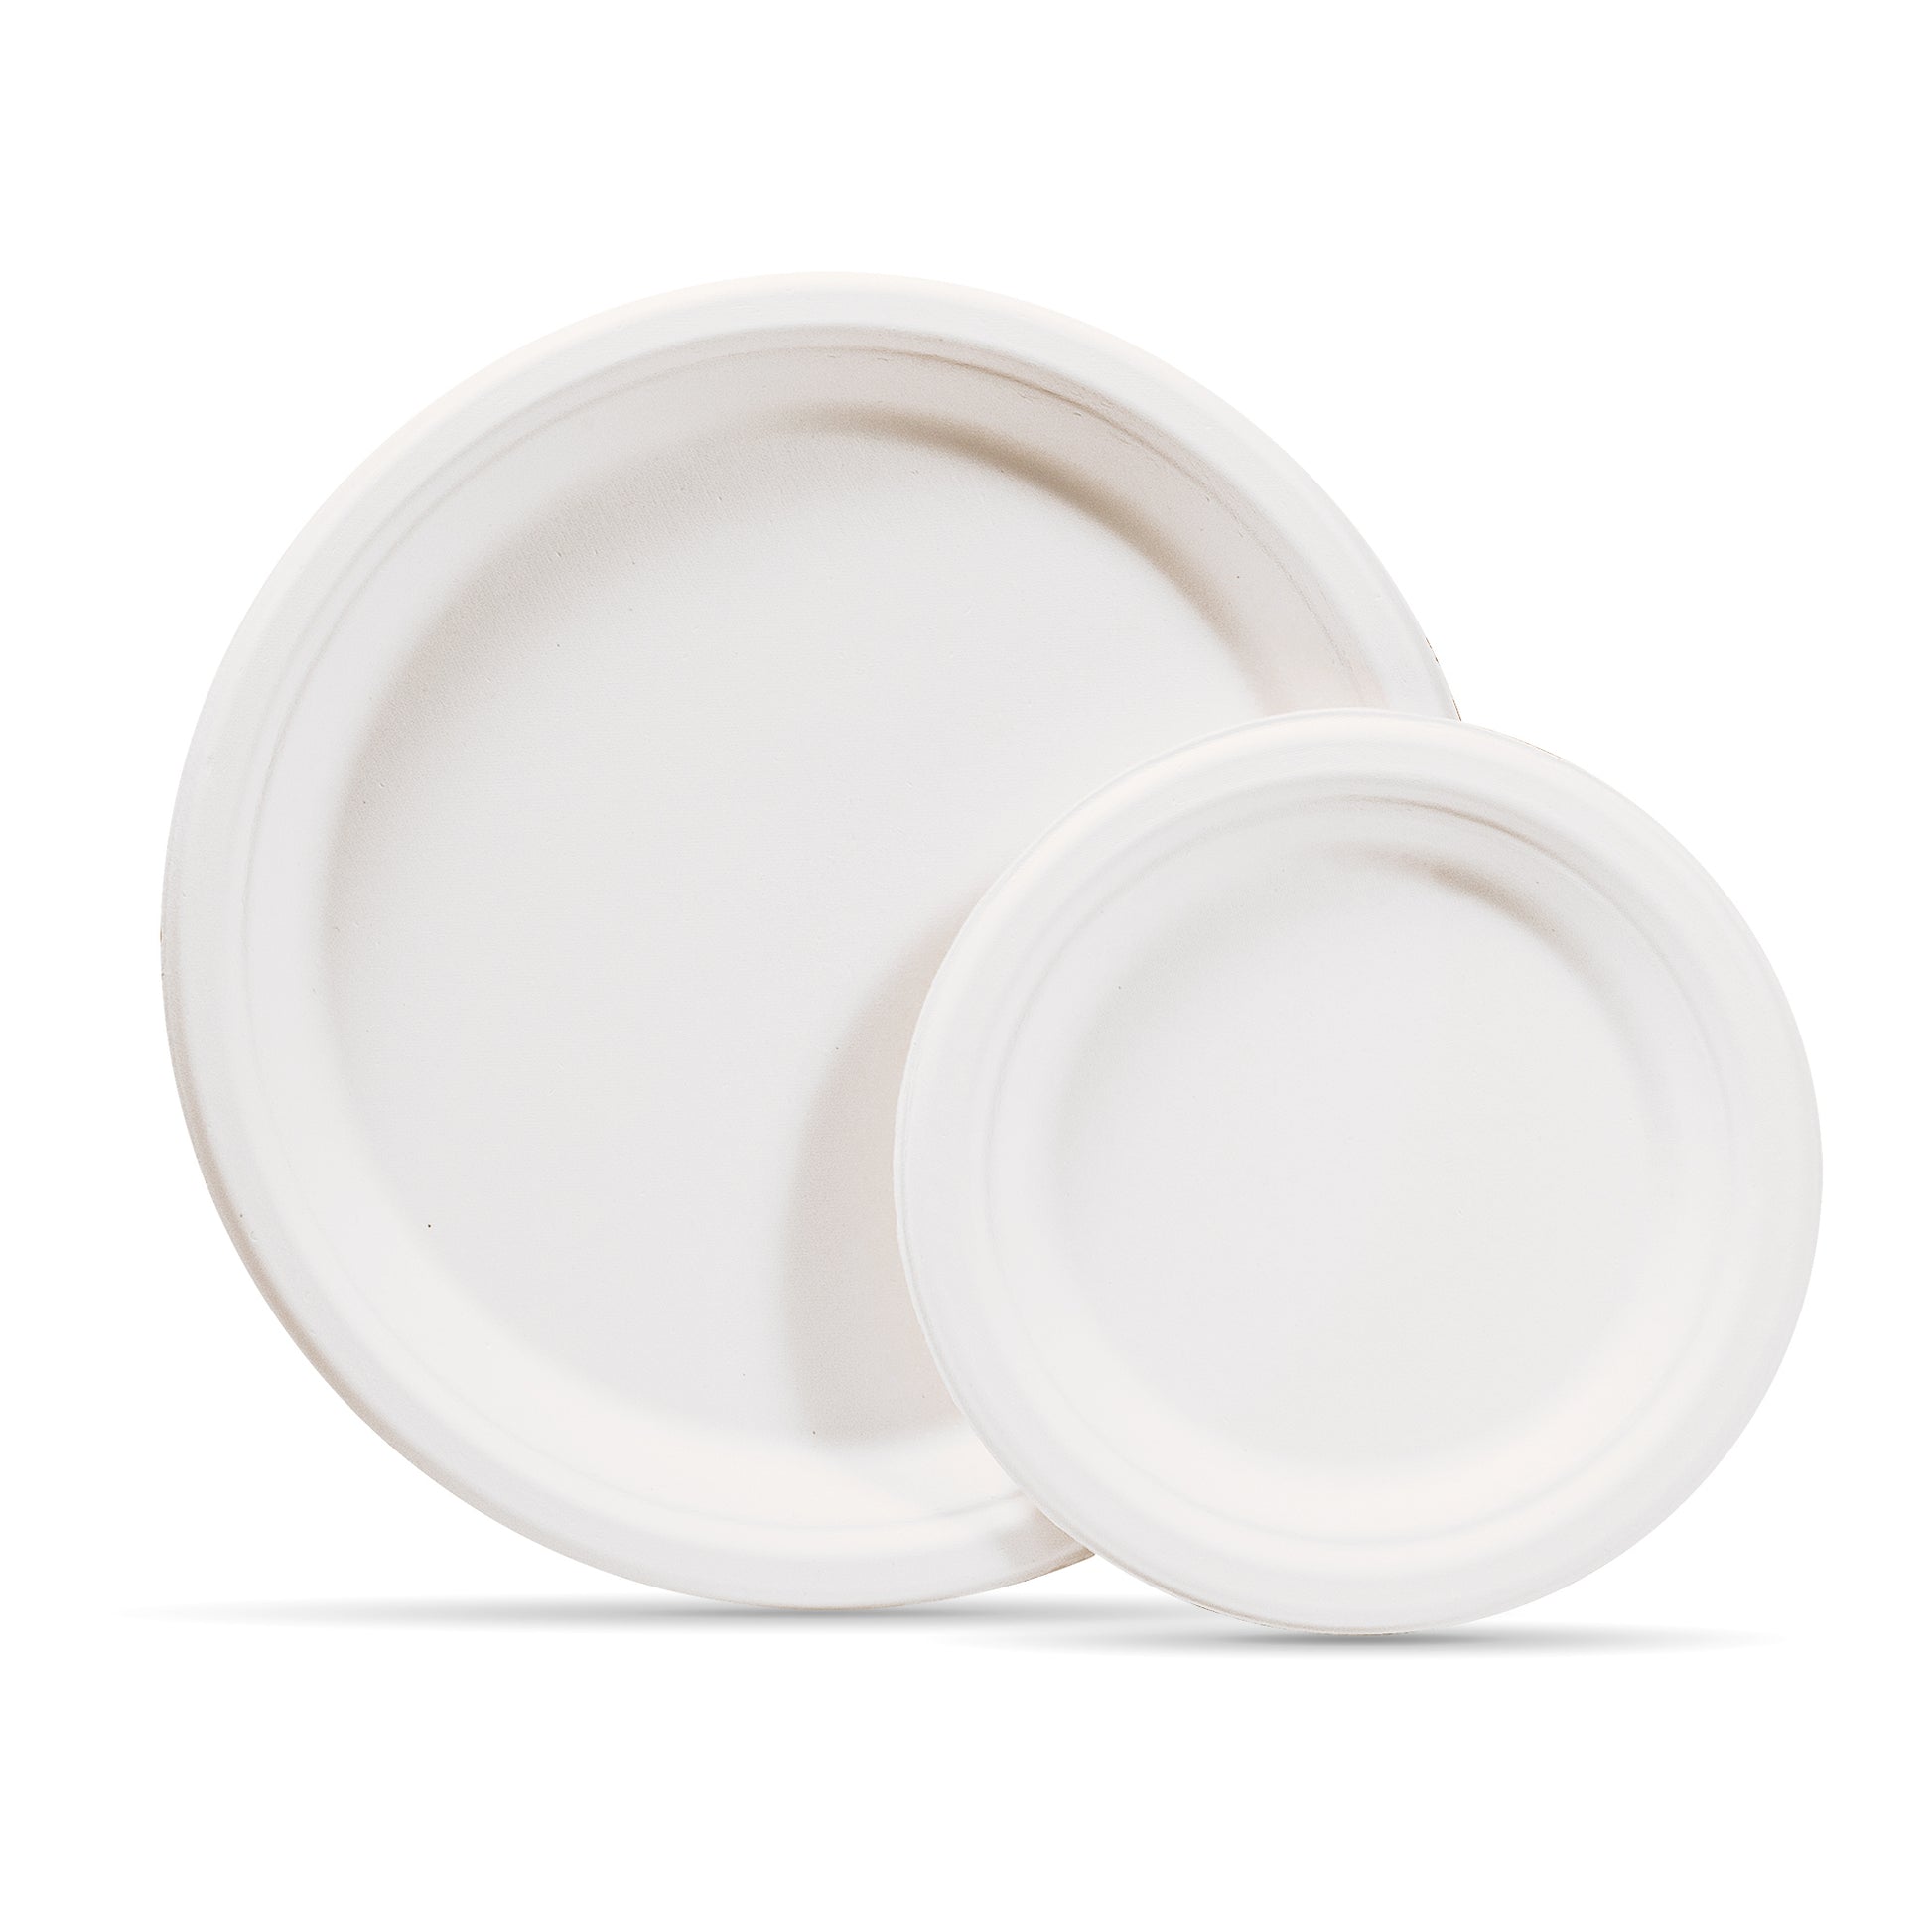 Biodegradable Paper Plates-Compostable Plate-Go-Compost